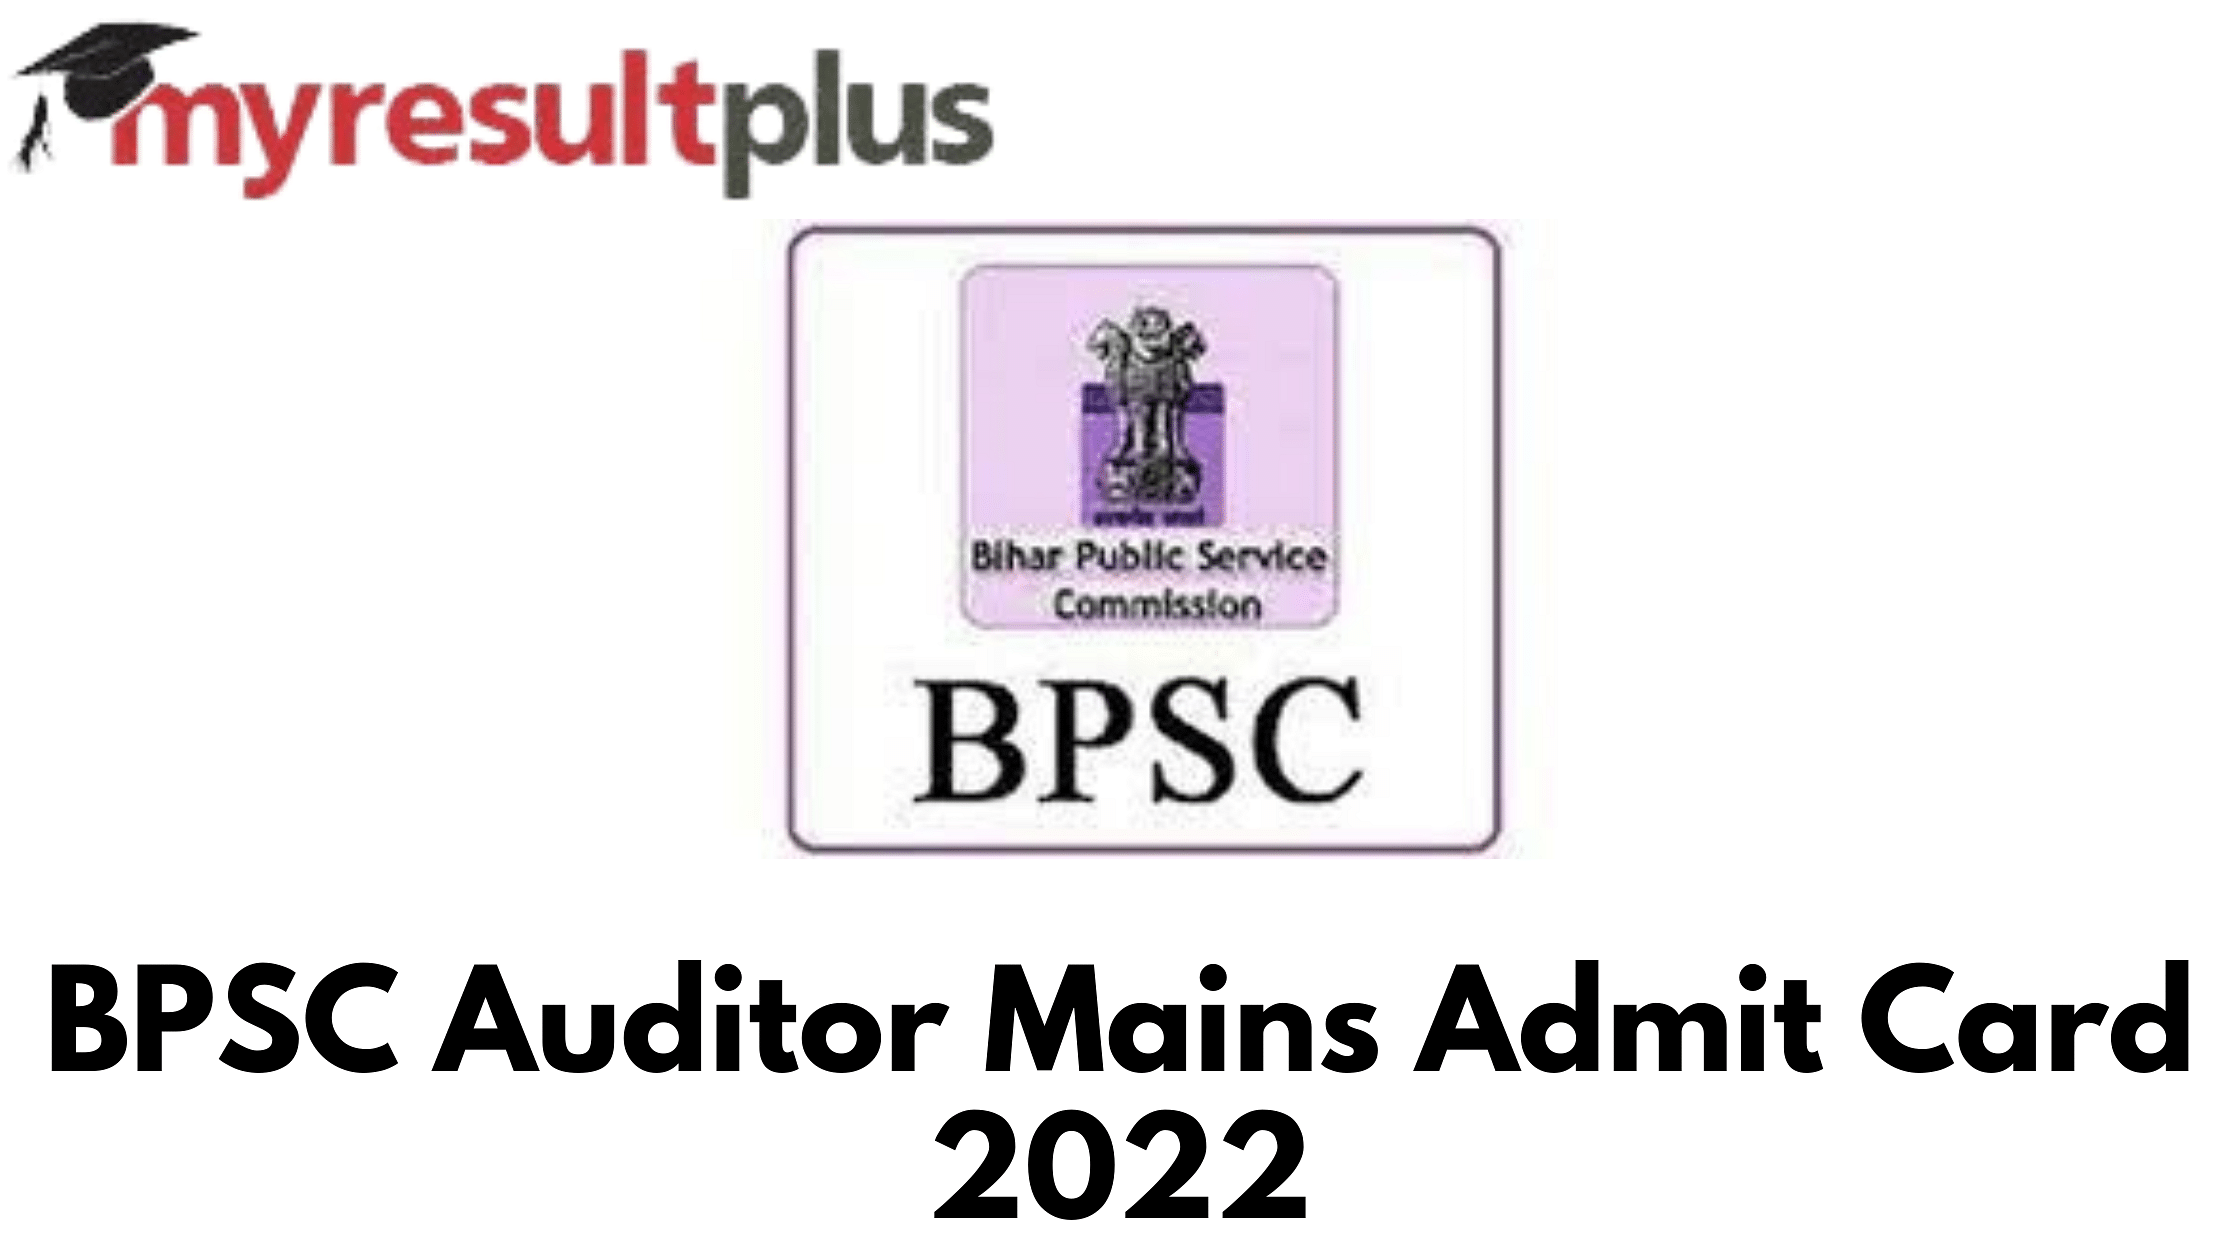 BPSC Auditor Mains Admit Card 2022 Available for Download, Direct Link Here